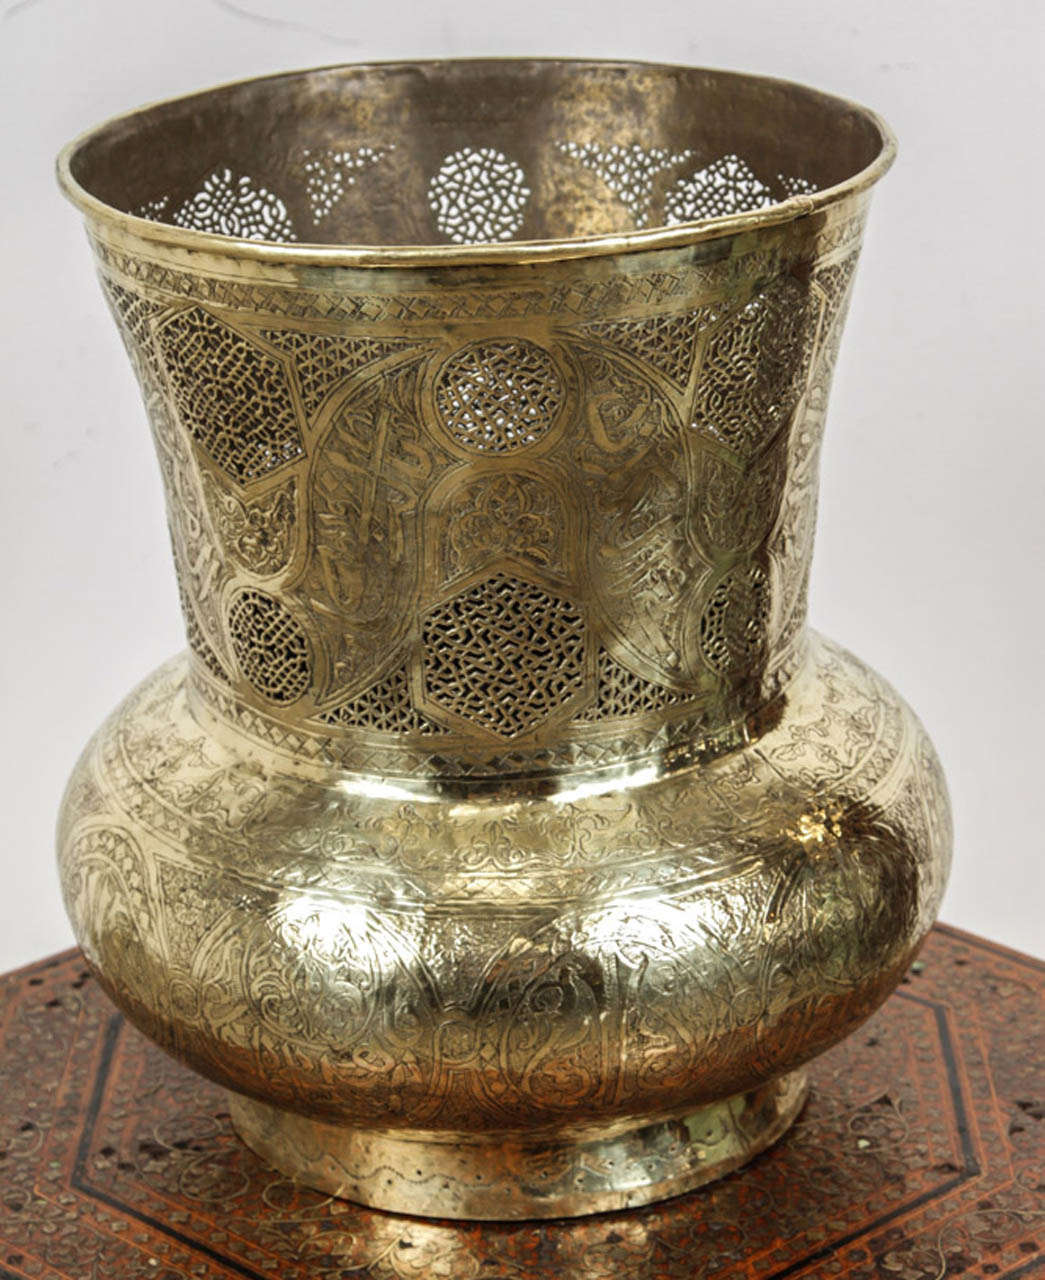 Persian hand-etched Mameluke style brass bowl.
Could be used as a jardiniere for a large orchids composition.
Engraved and hand-cut Arabic Islamic calligraphy and geometric designs on brass vessel. Cache pot.
.